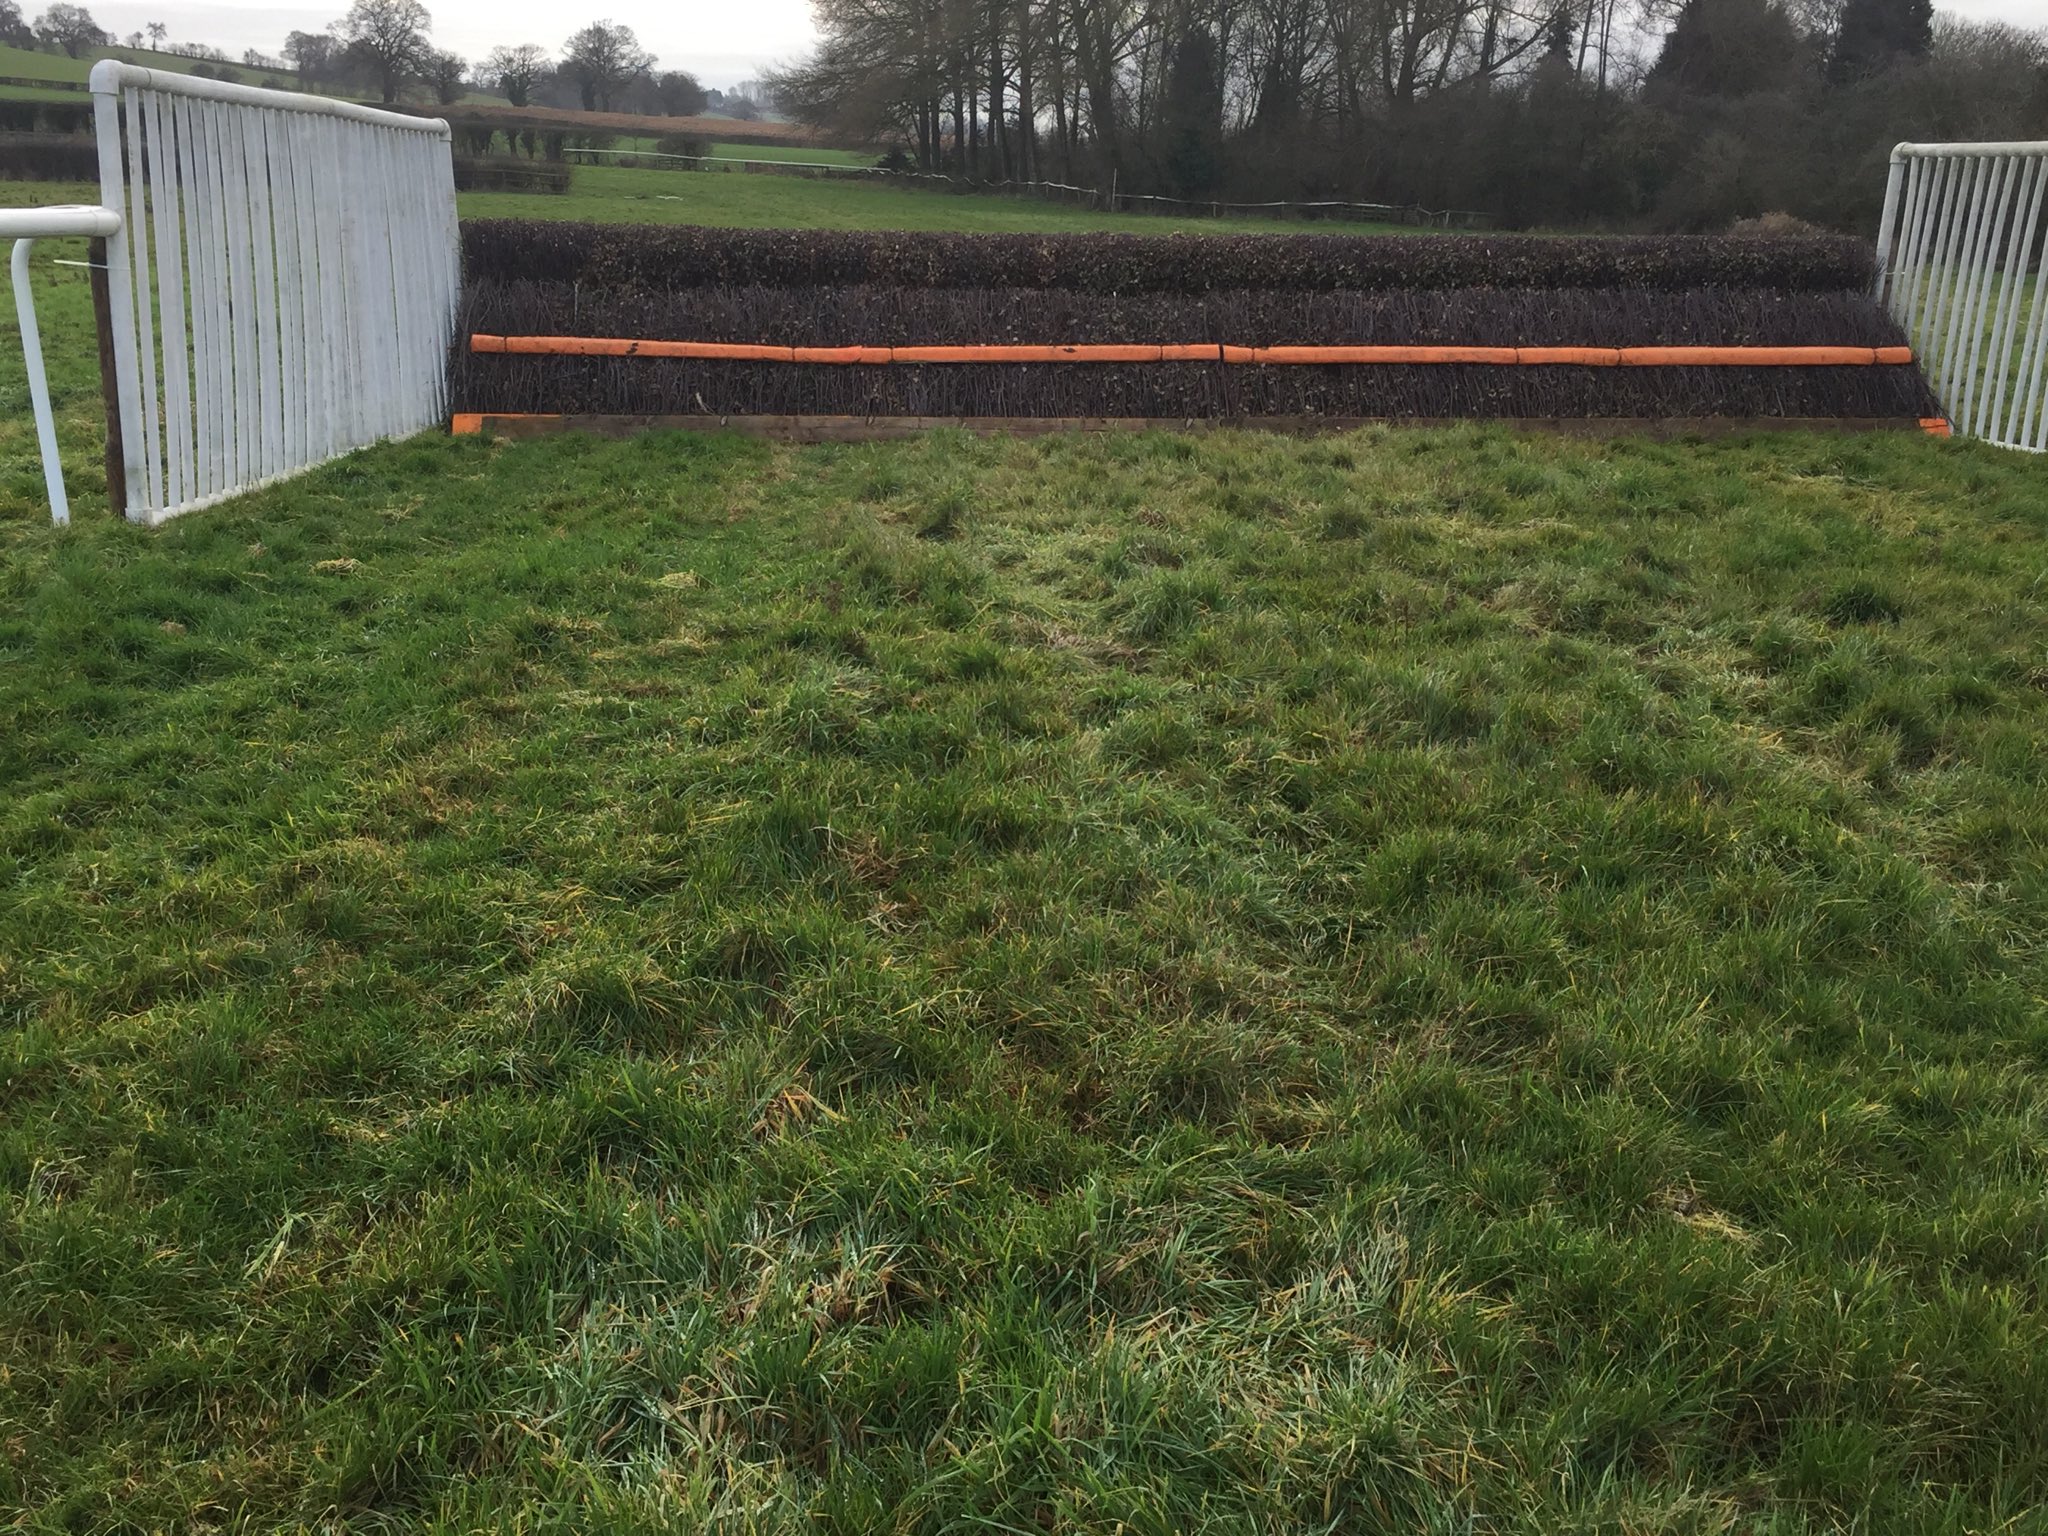 Entries: Harkaway Club Point-to-Point – 28/12/2018